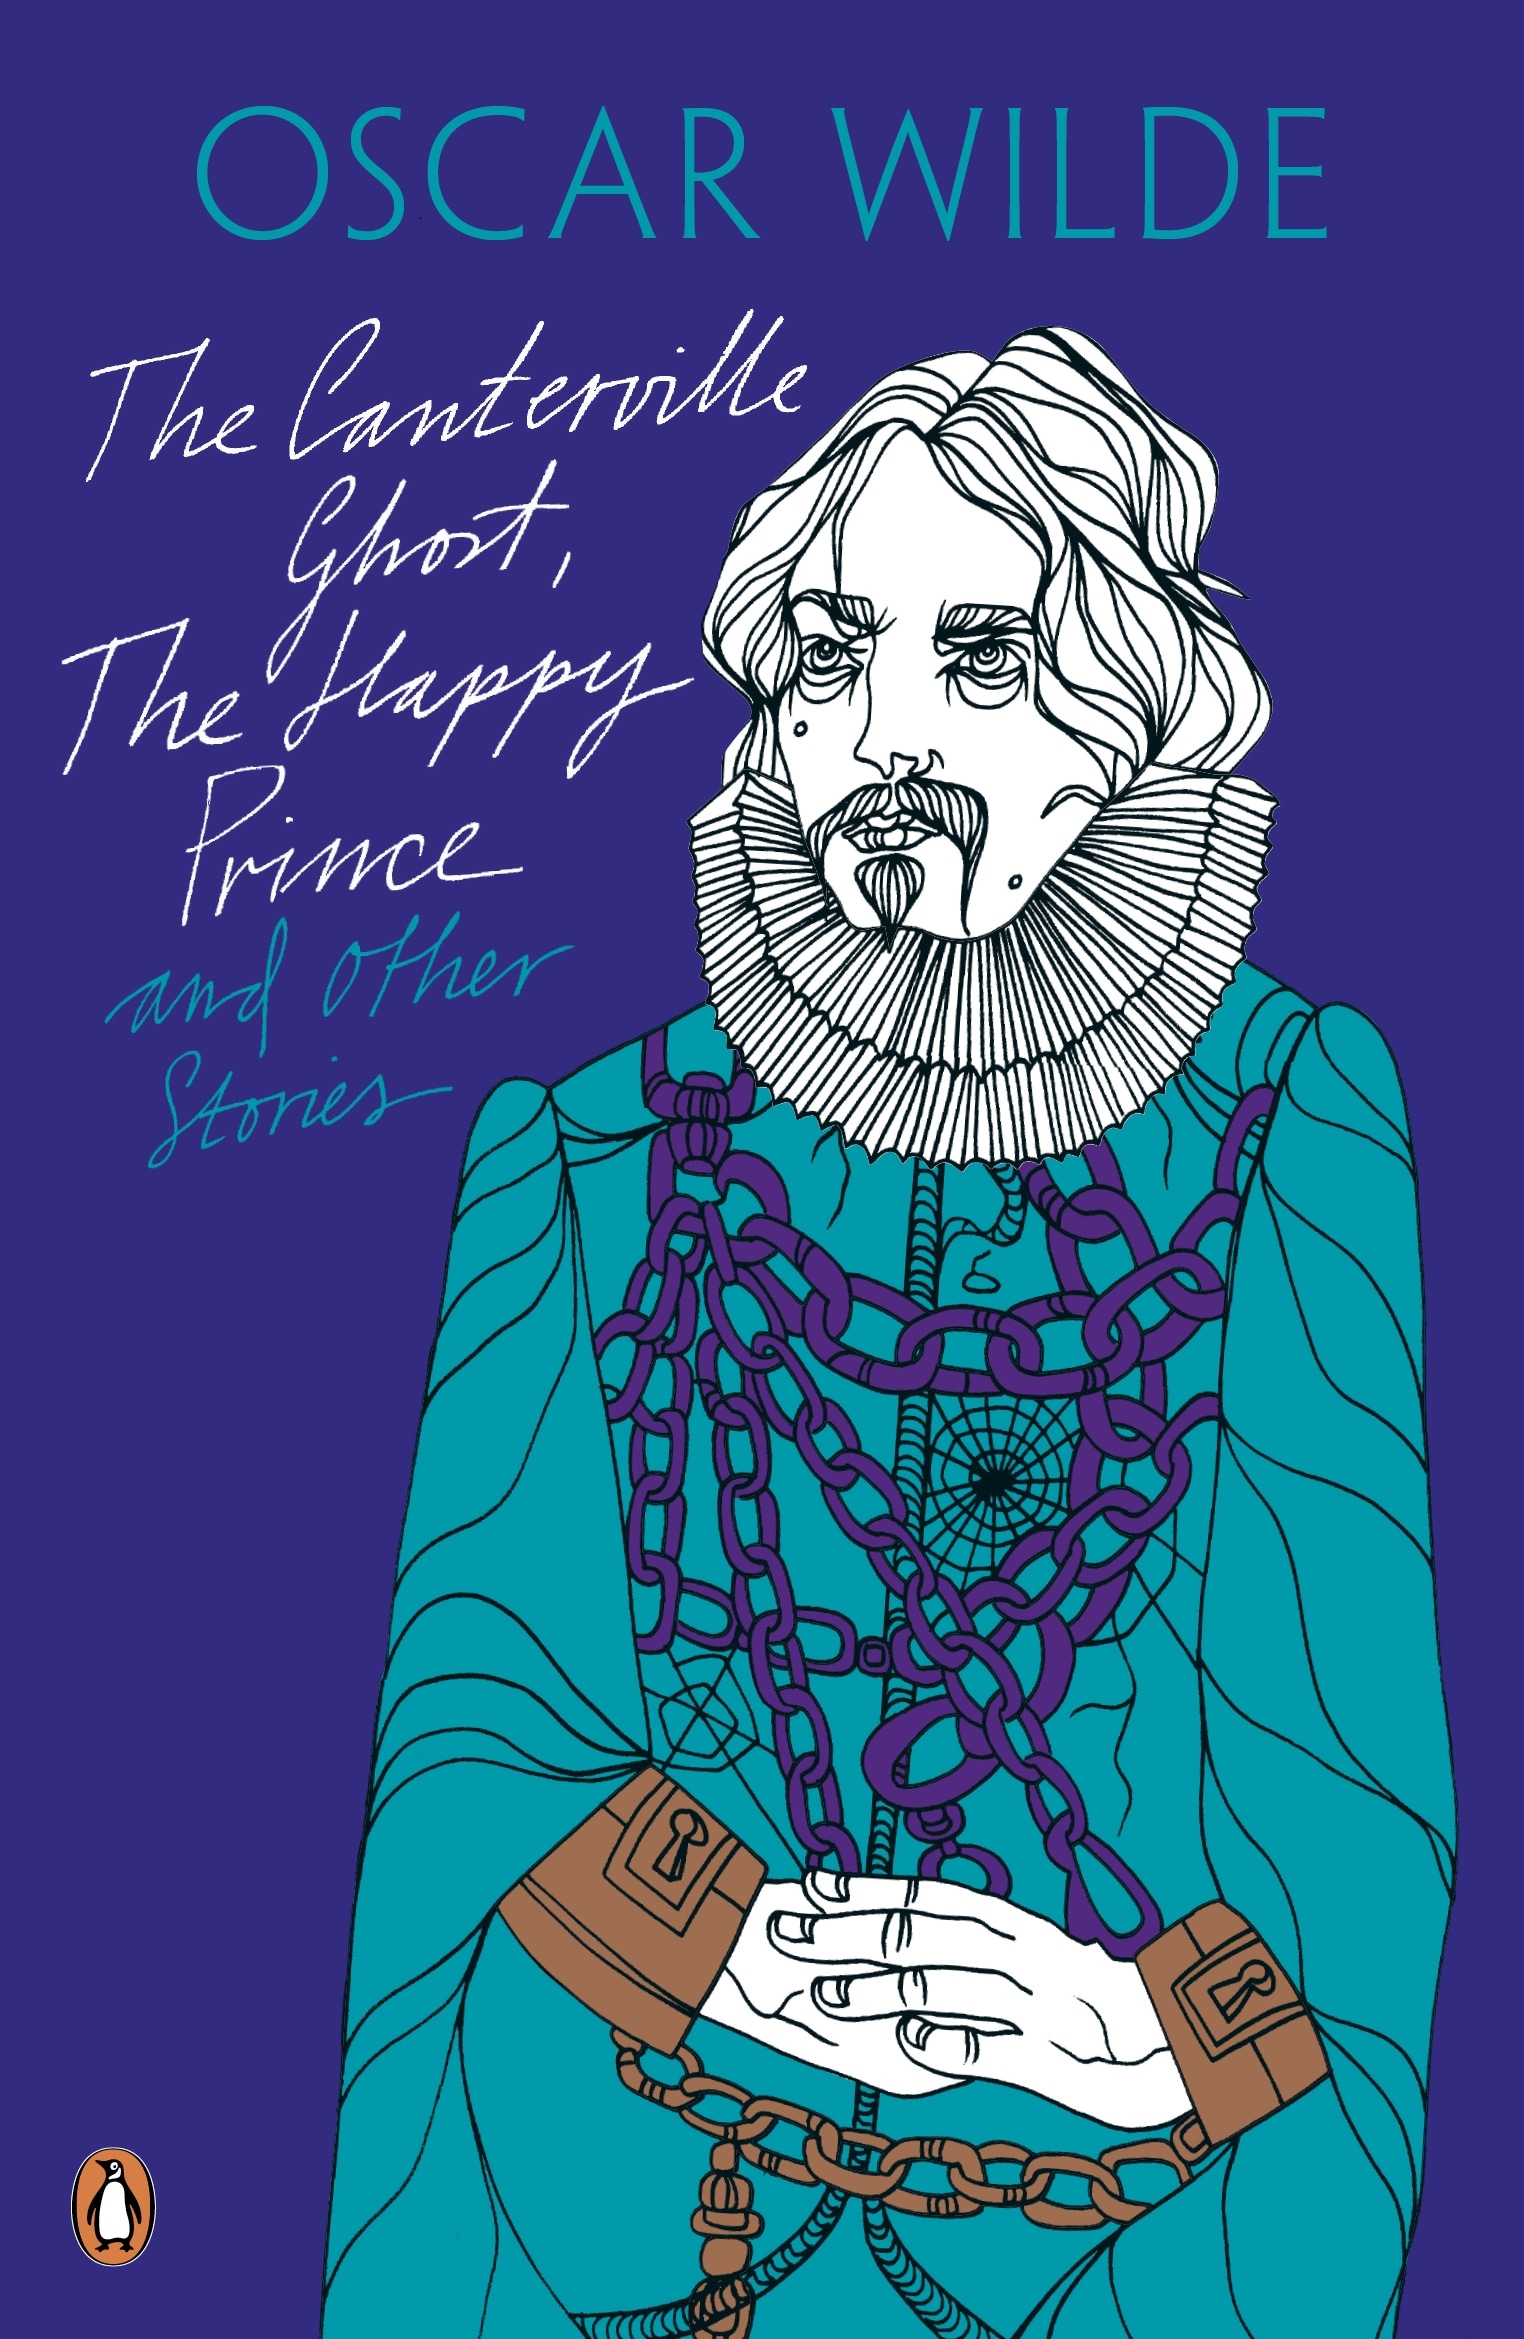 Book “The Canterville Ghost, The Happy Prince and Other Stories” by Oscar Wilde — April 1, 2010